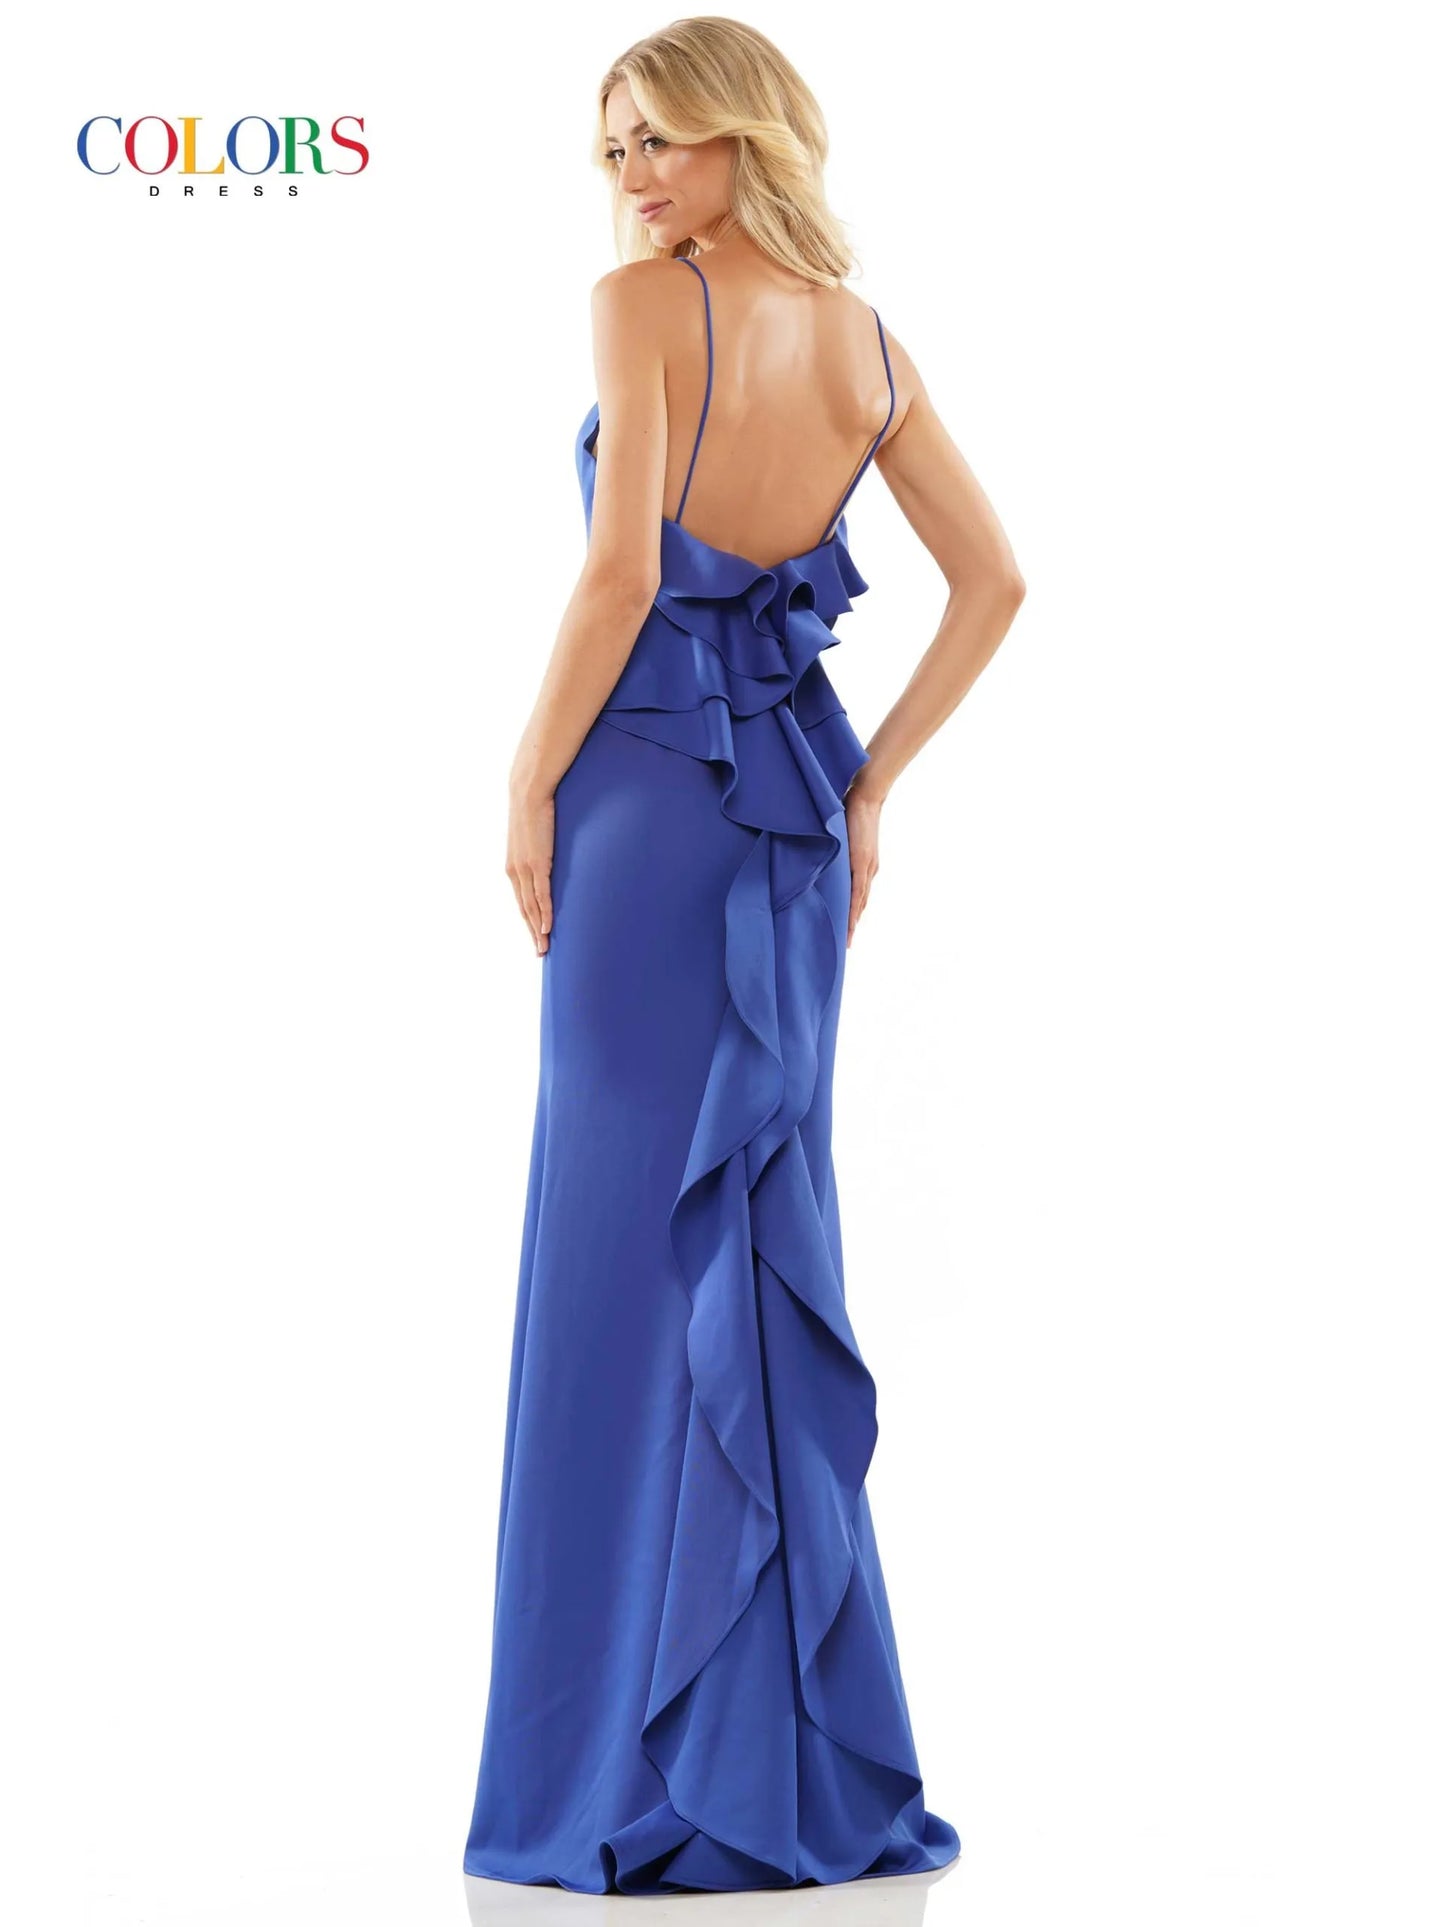 Experience elegance and sophistication with the Colors Dress 2646 Long Prom Dress. The V-neck design and spaghetti straps accentuate your natural curves, while the ruffled detailing adds a touch of femininity. Made of high-quality jersey fabric, this gown offers both comfort and style for your formal or pageant event.